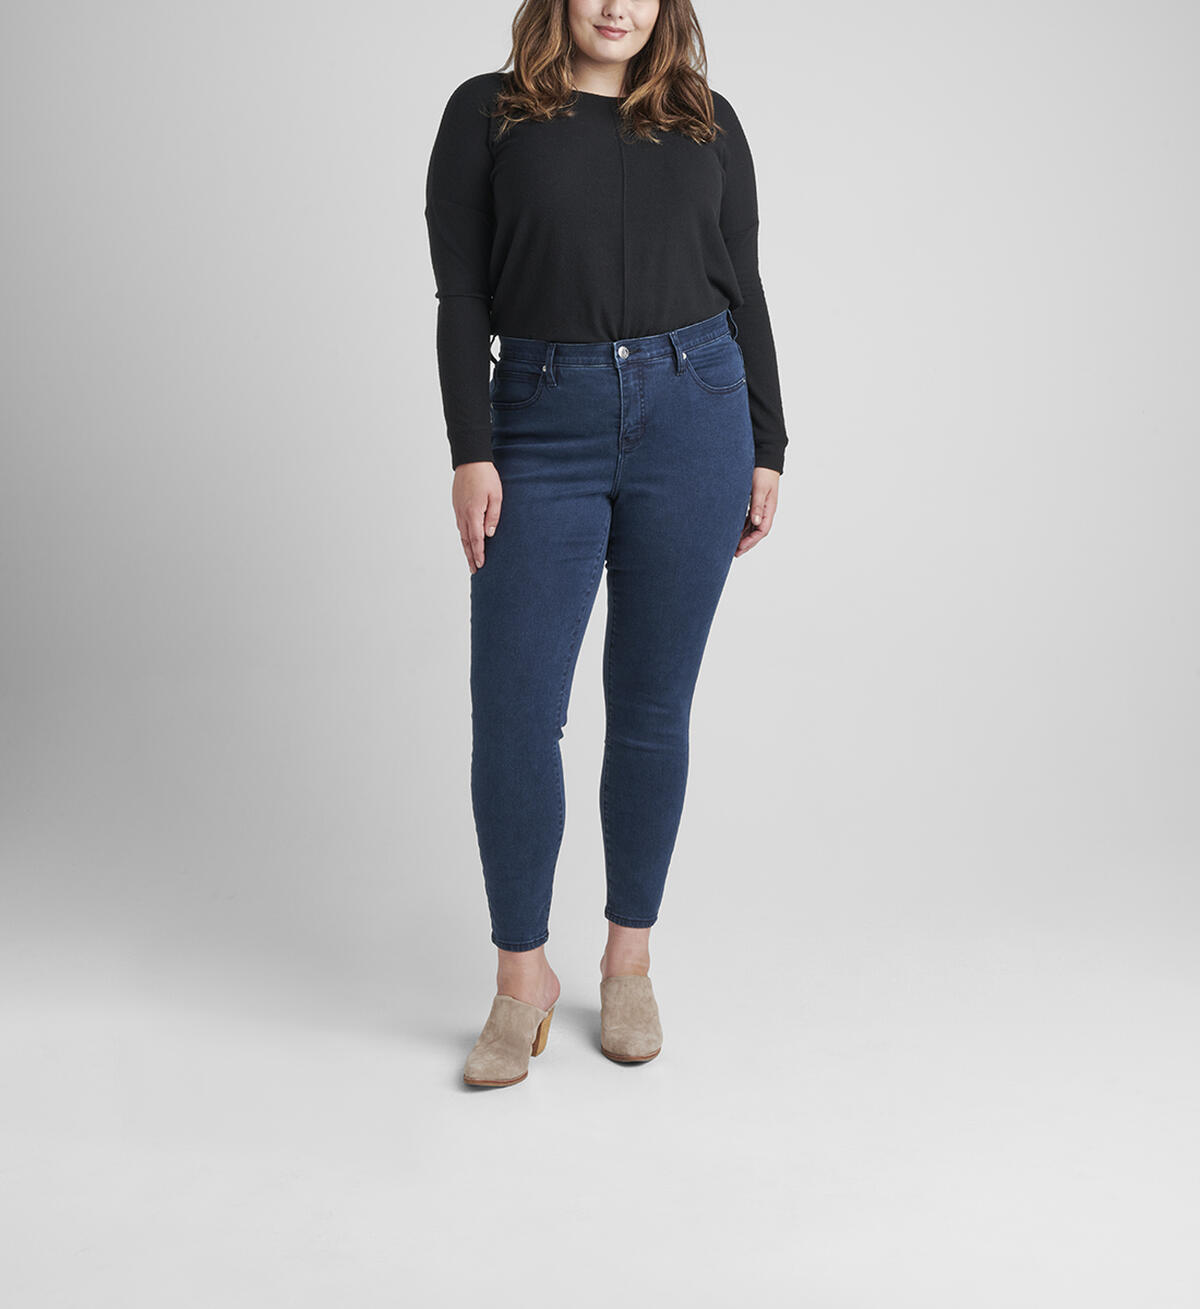 Cecilia High Rise Skinny Jeans Plus Size, , hi-res image number 0